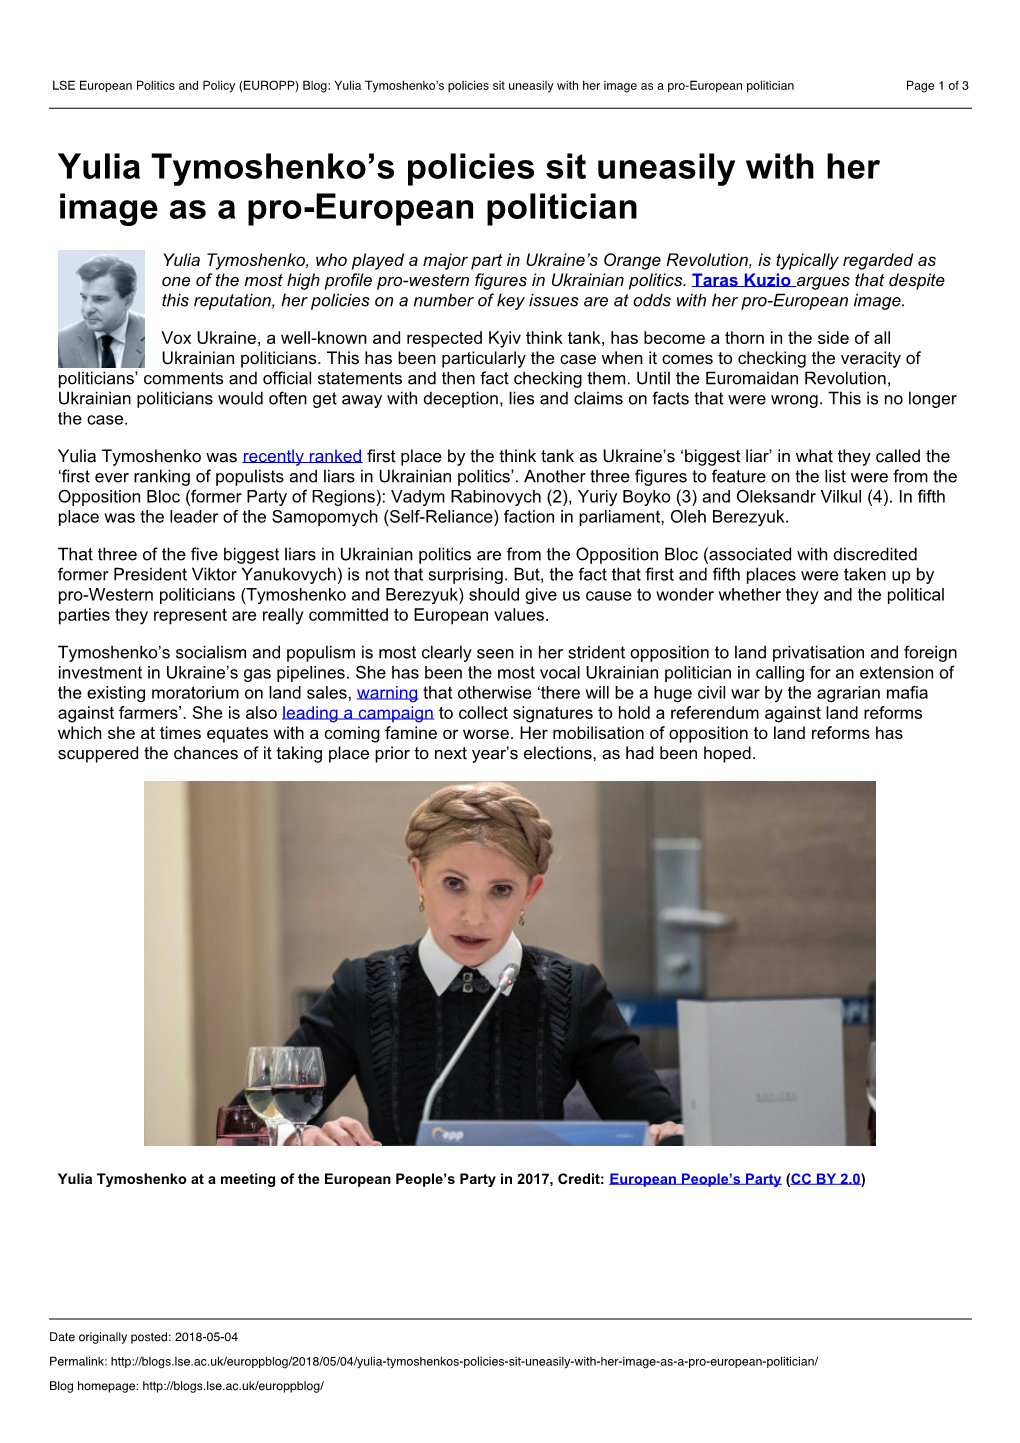 Blog: Yulia Tymoshenko's Policies Sit Uneasily with Her Image As a Pro